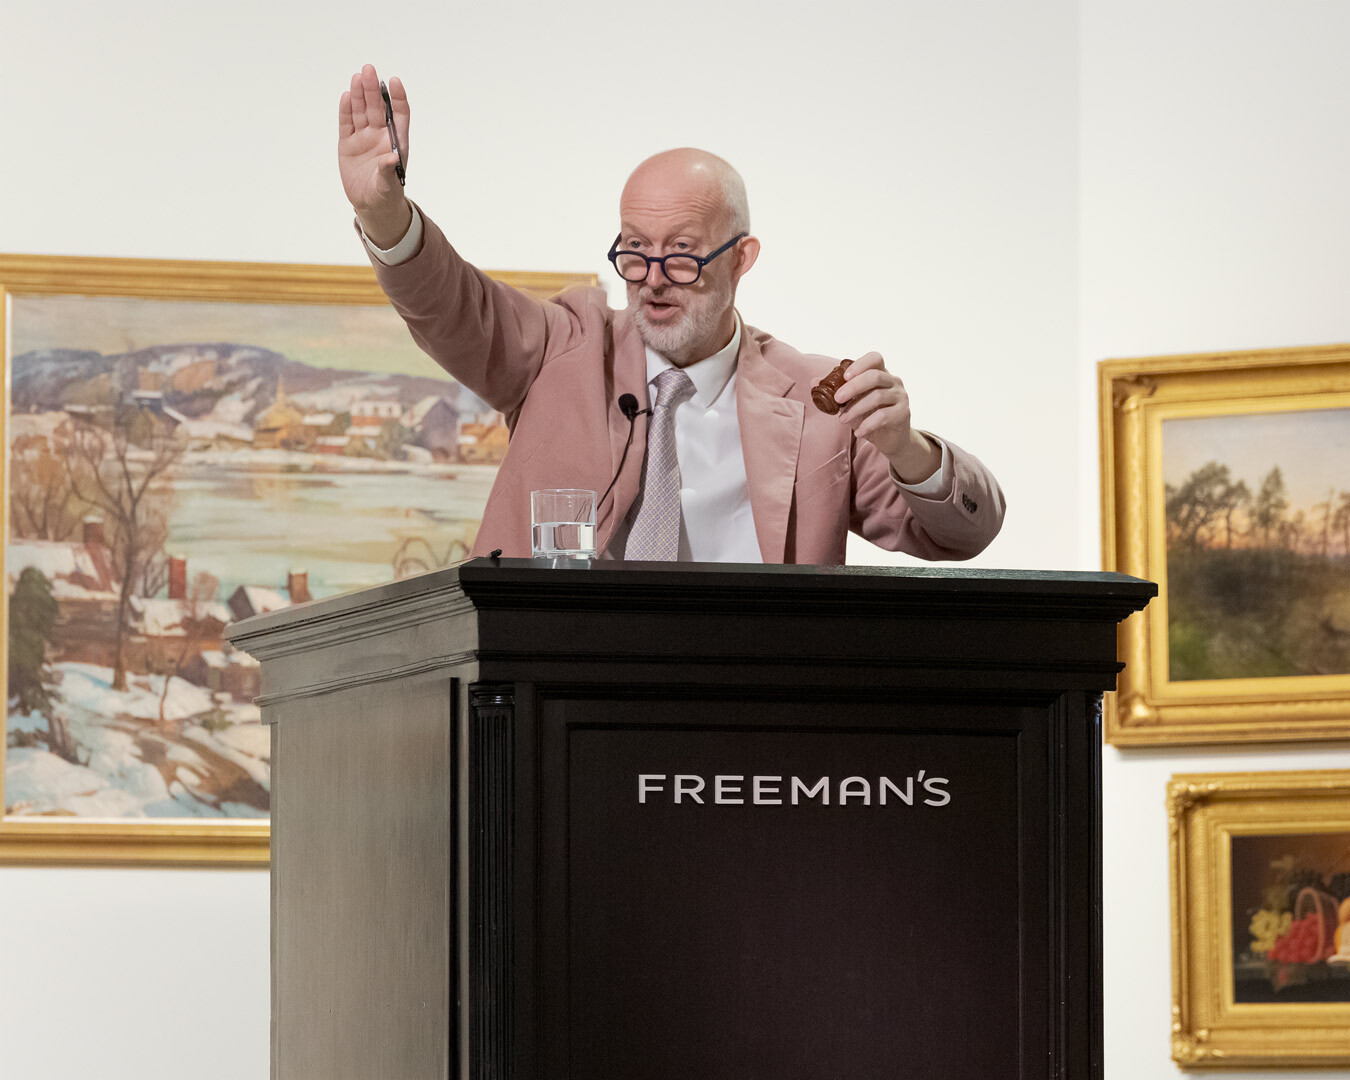 Freeman’s Chairman and Director of Fine Art, Alasdair Nichol, shown at the auctioneer’s podium. 